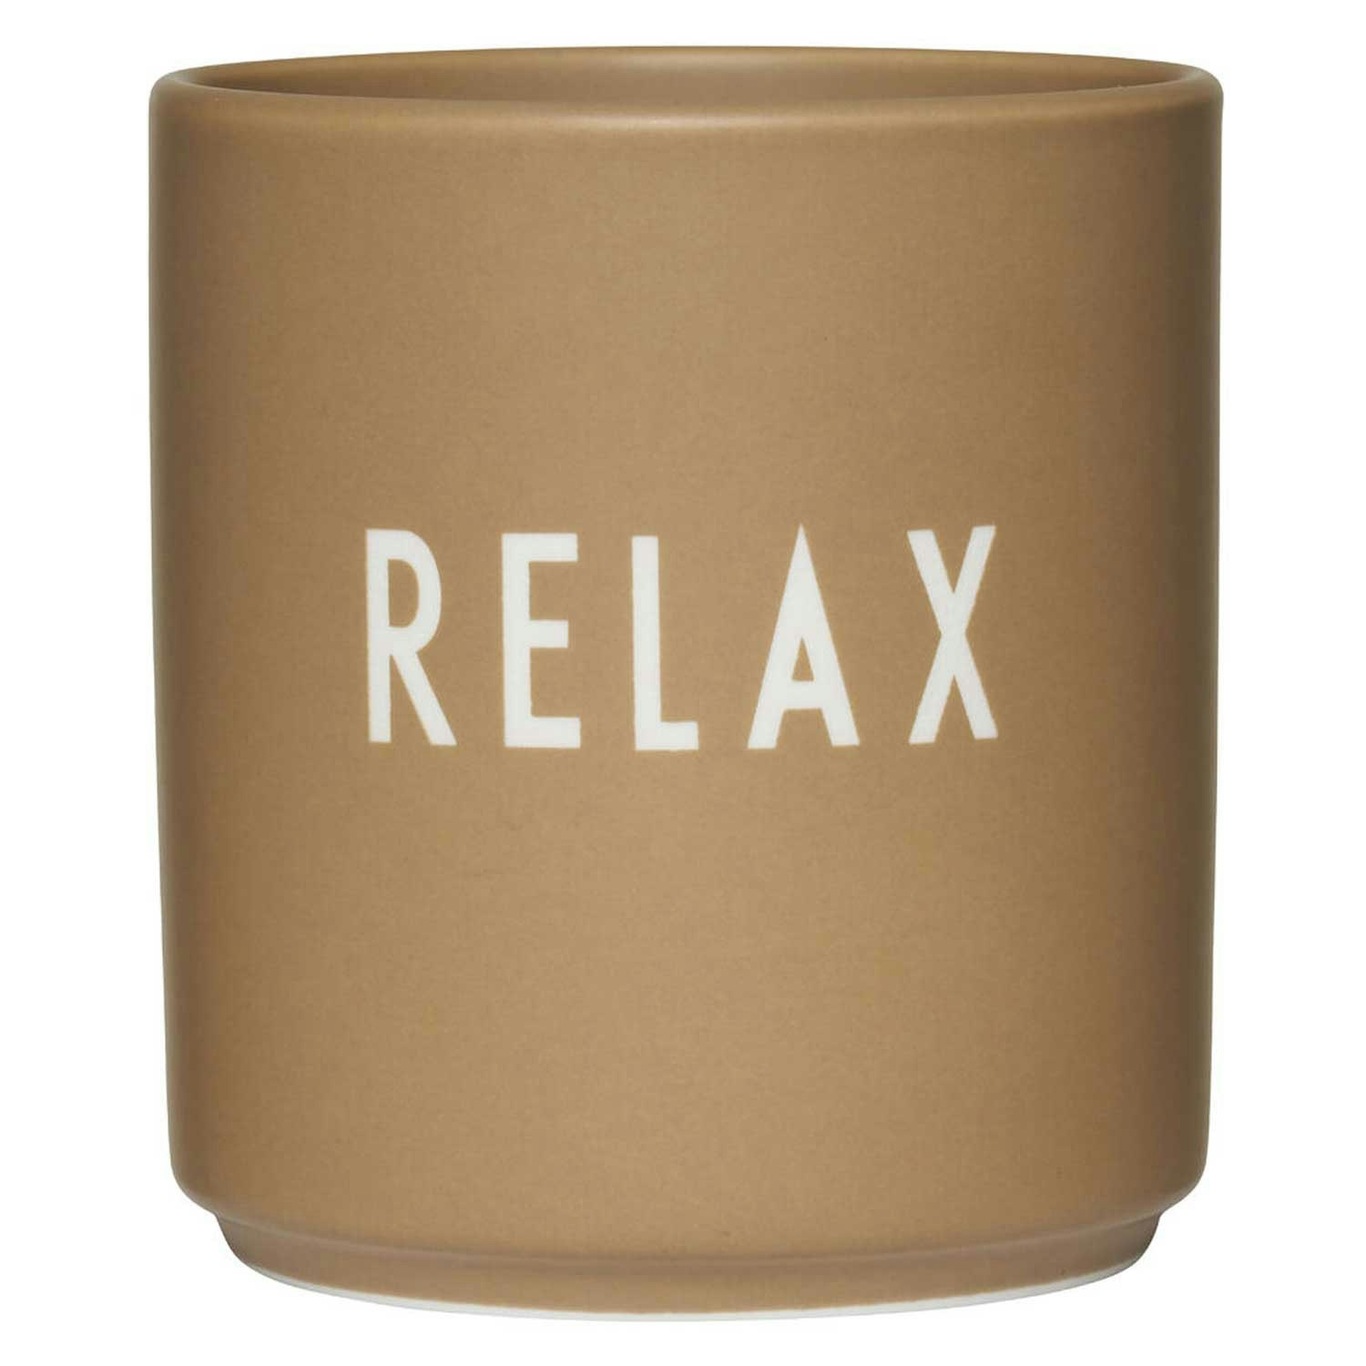 Favorite Cup 25 cl, Good Life Collection, Relax